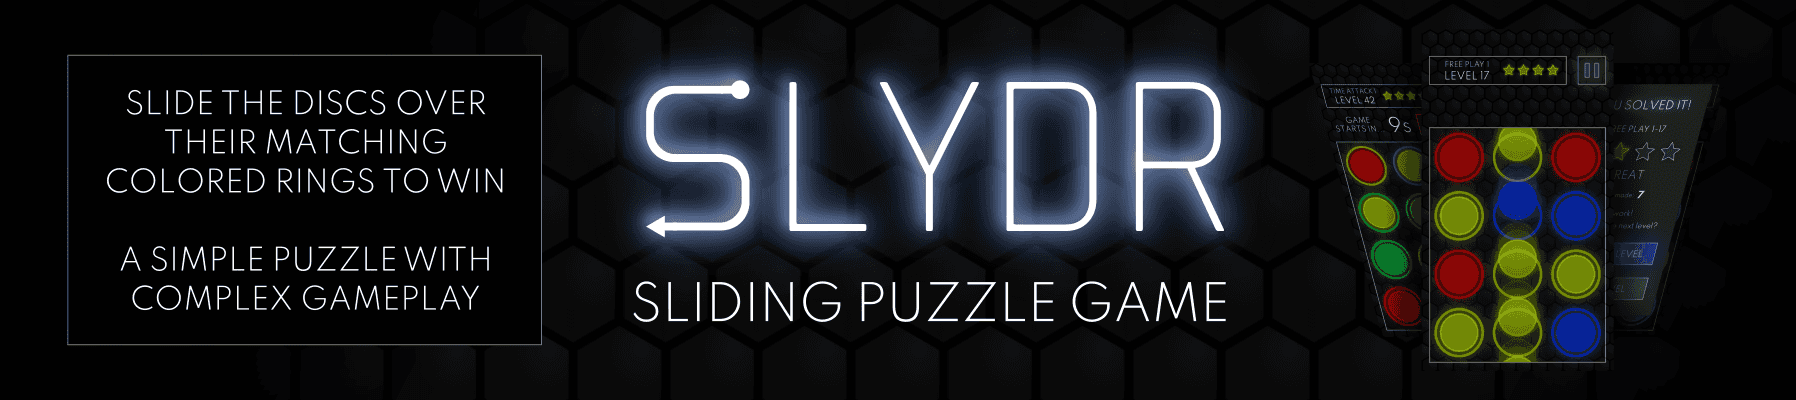 Slydr sliding puzzle game - click to download